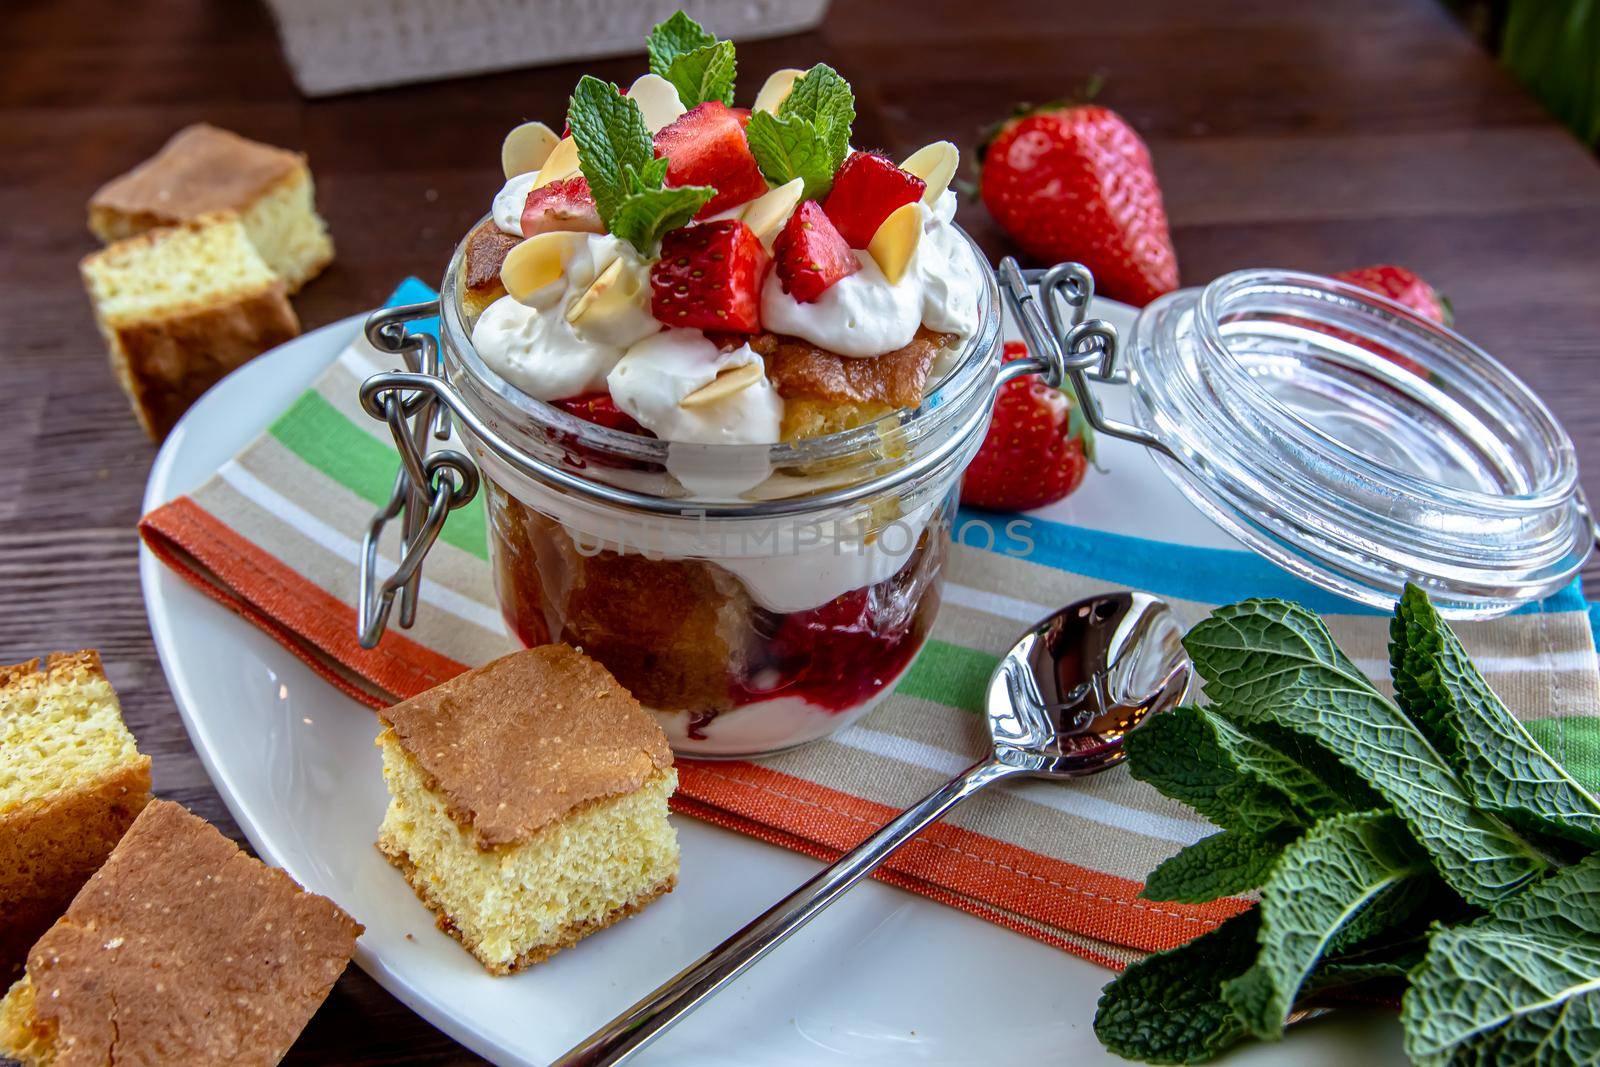 Layered Dessert of chocolate sponge cake, whipped cream or ricotta and fresh strawberries in a glass bowl. Trifle. Delicious gourmet breakfast. by Milanchikov